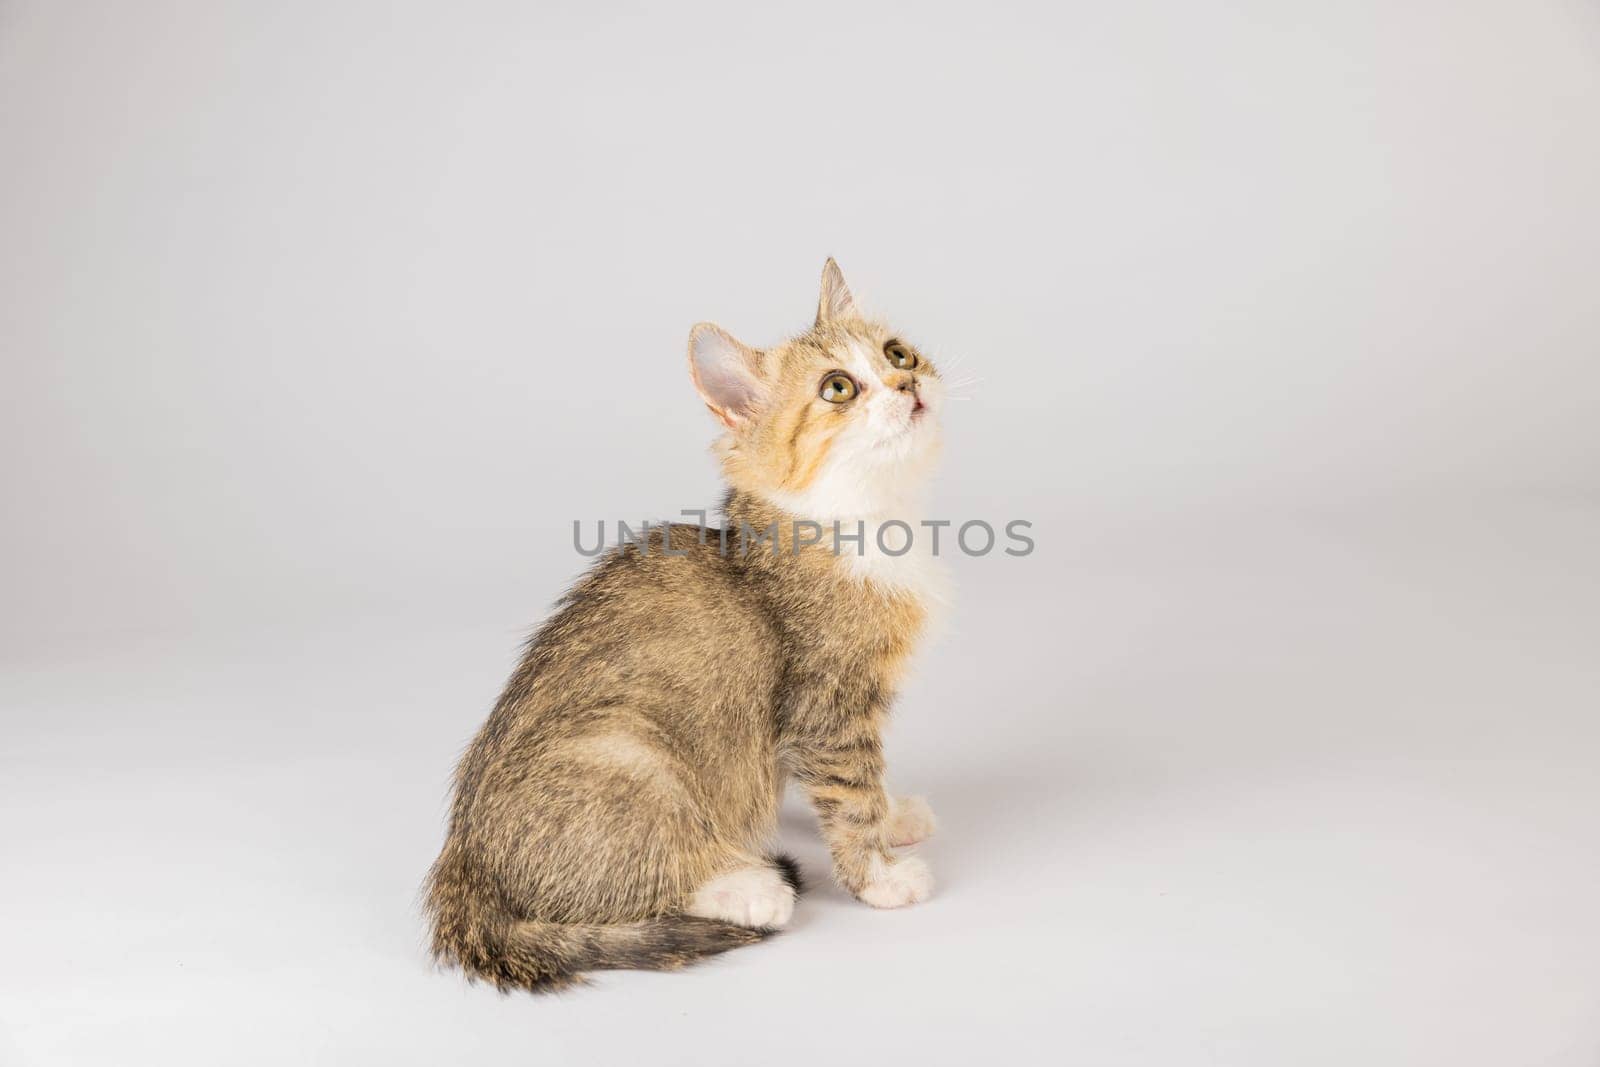 A beautiful little grey Scottish Fold cat stands, looking playful and cheerful in this isolated cat portrait on a white background.